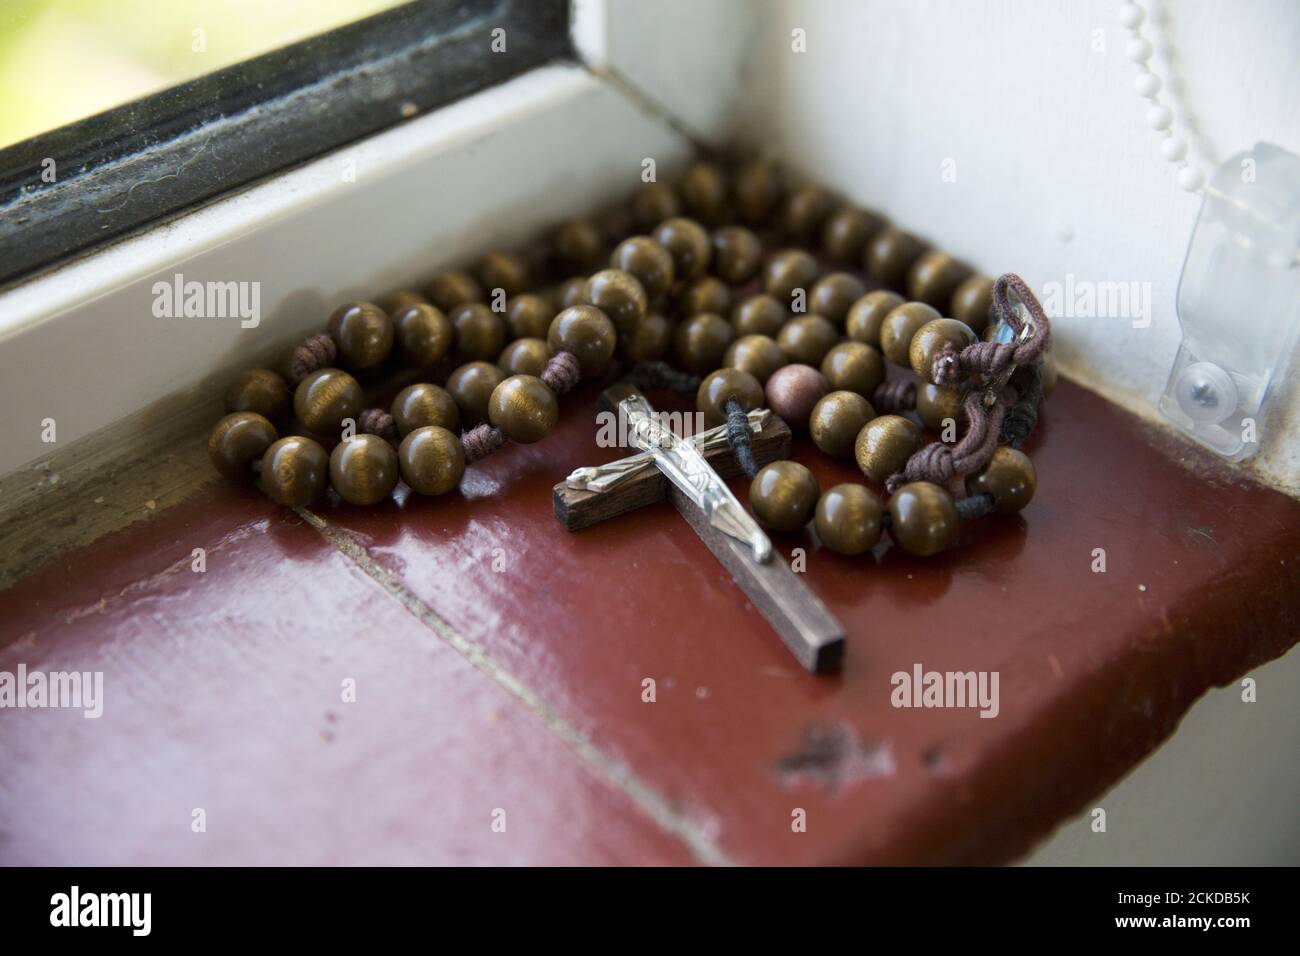 A crucifix and rosary beads lie on a windowsill in St Cuthbert's Hermitage in Lincolnshire, north east Britain April 27, 2015. Denton, a Catholic hermit, rises early to tend to her vegetable garden, feed her cats and pray. But the former Carmelite nun, who in 2006 pledged to live the rest of her life in solitude, has another chore - to update her Twitter account and check Facebook. 'The myth you often face as a hermit is that you should have a beard and live in a cave. None of which is me,' says the ex-teacher. For the modern-day hermit, she says social media is vital: 'tweets are rare, but pr Stock Photo